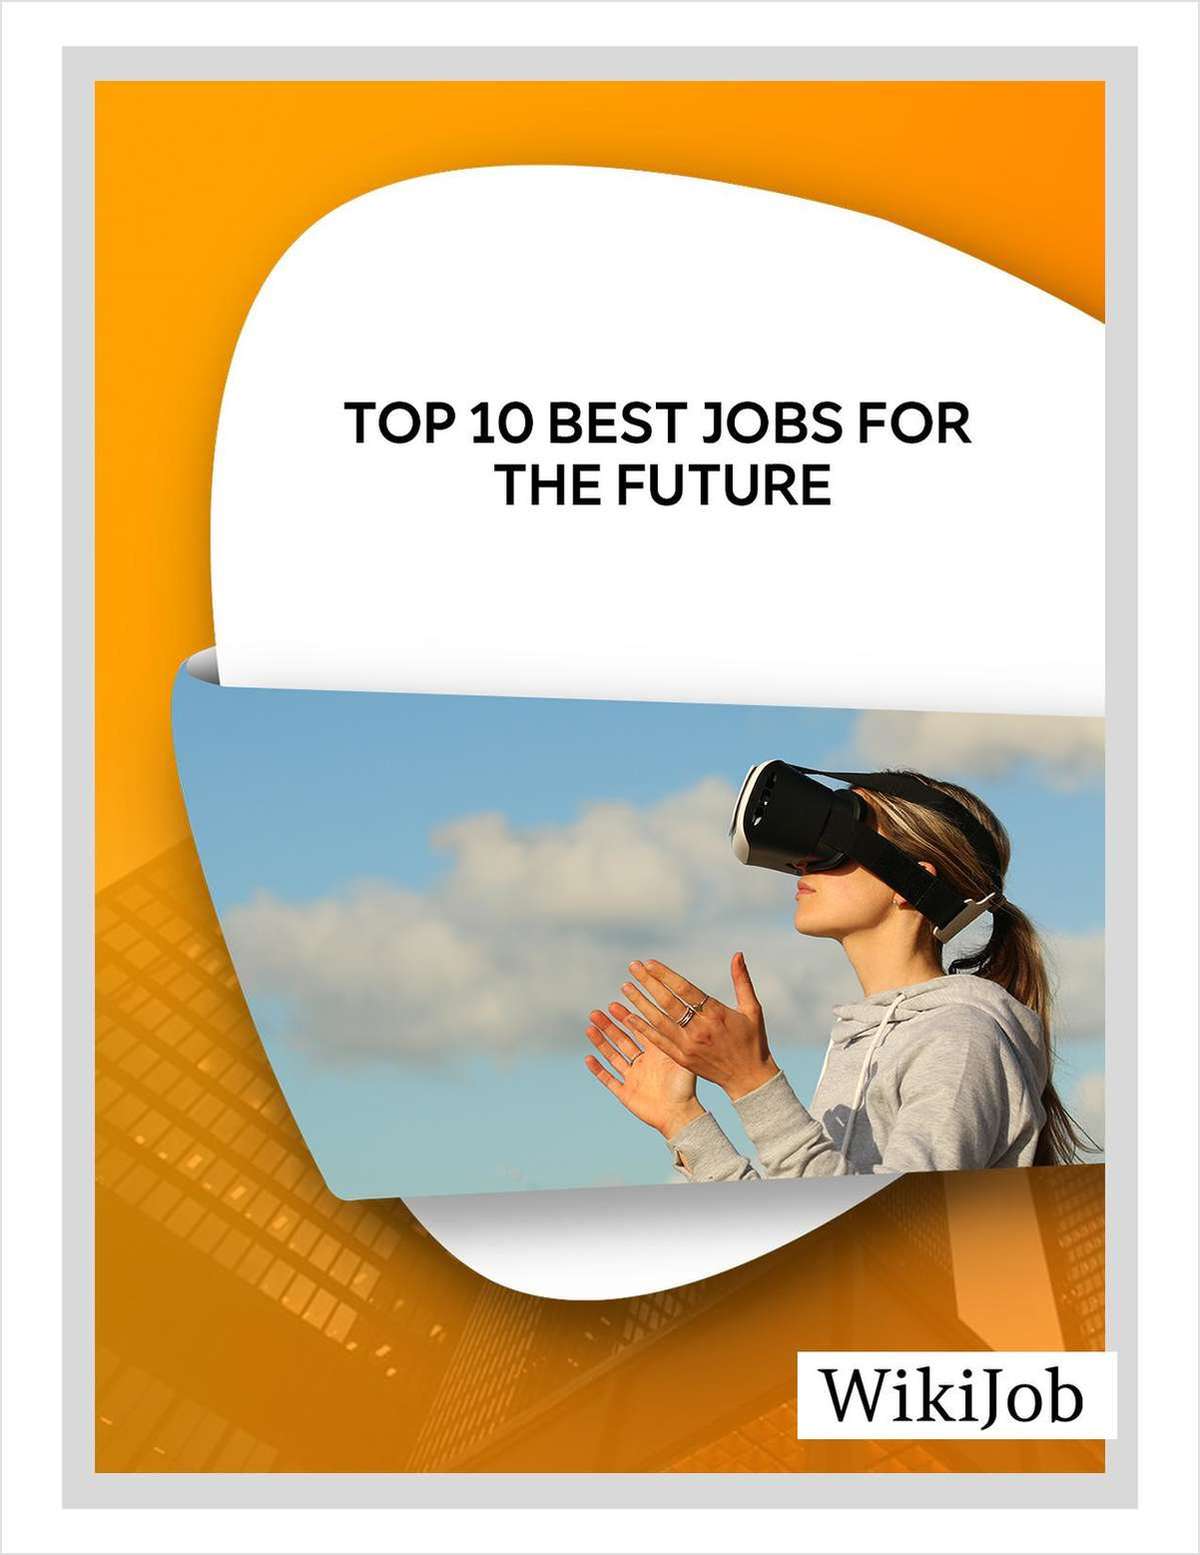 Top 10 Best Jobs for the Future